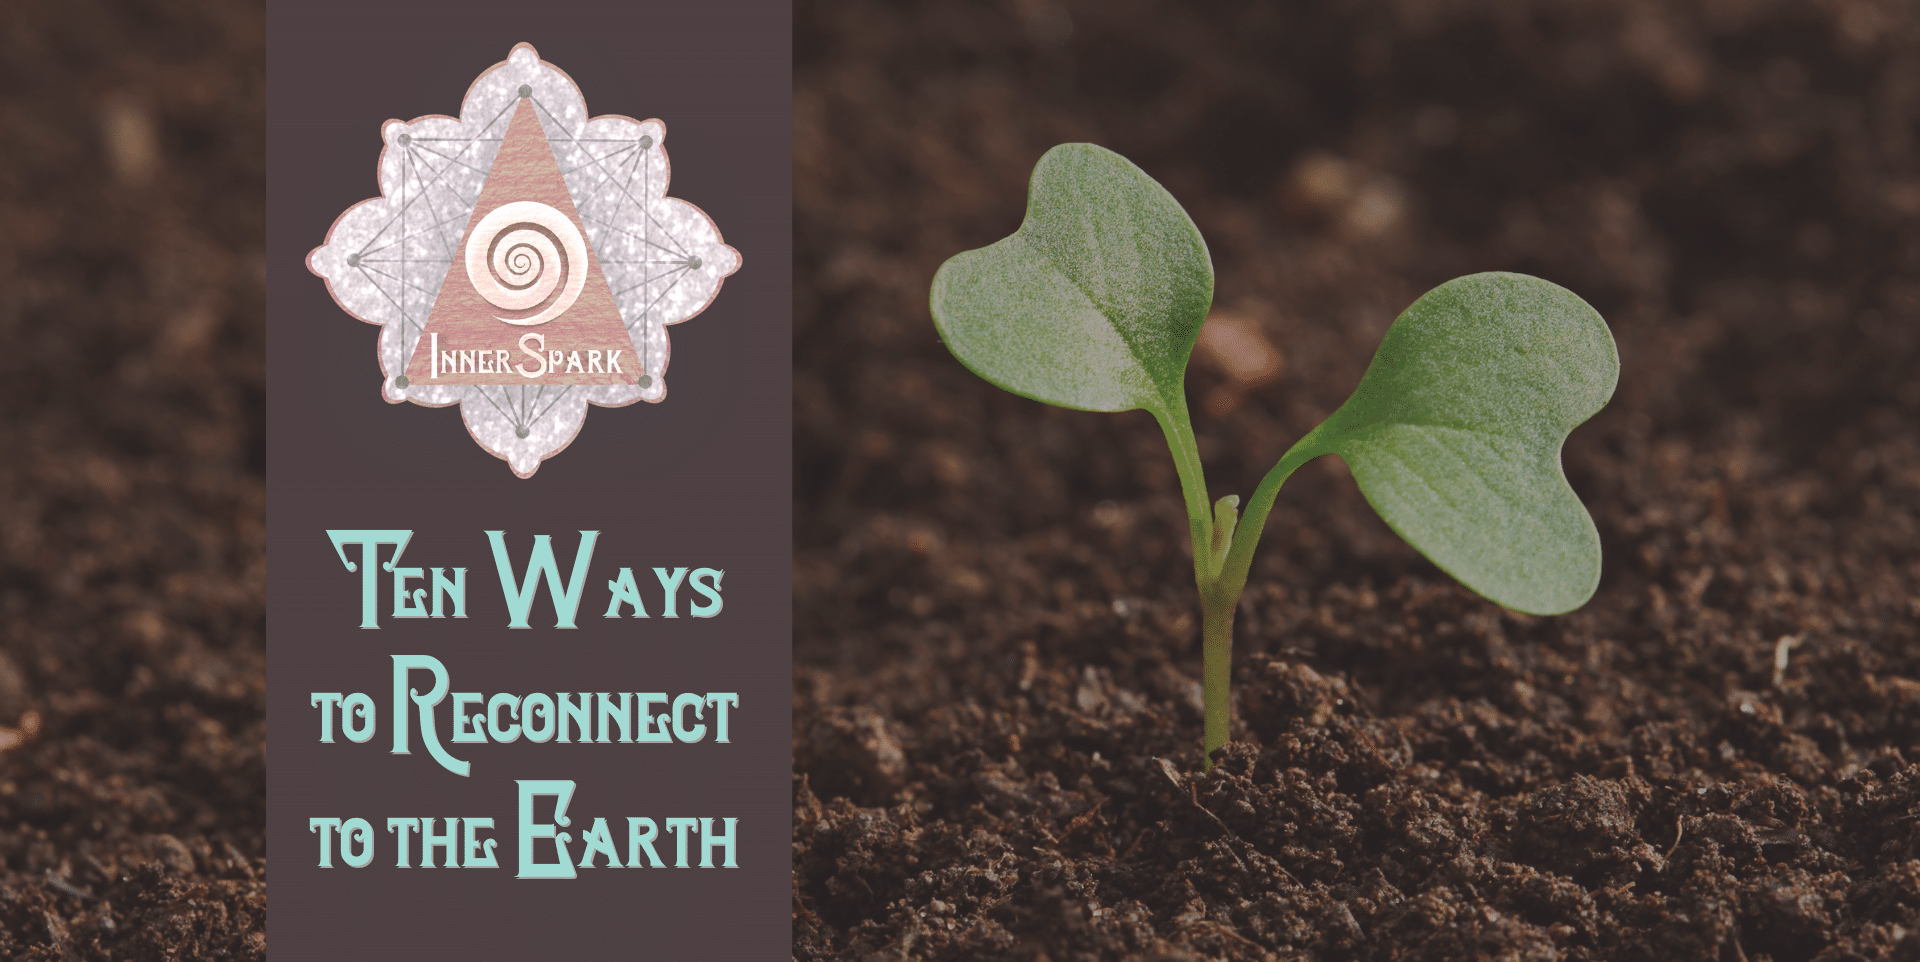 Reconnect to the Earth